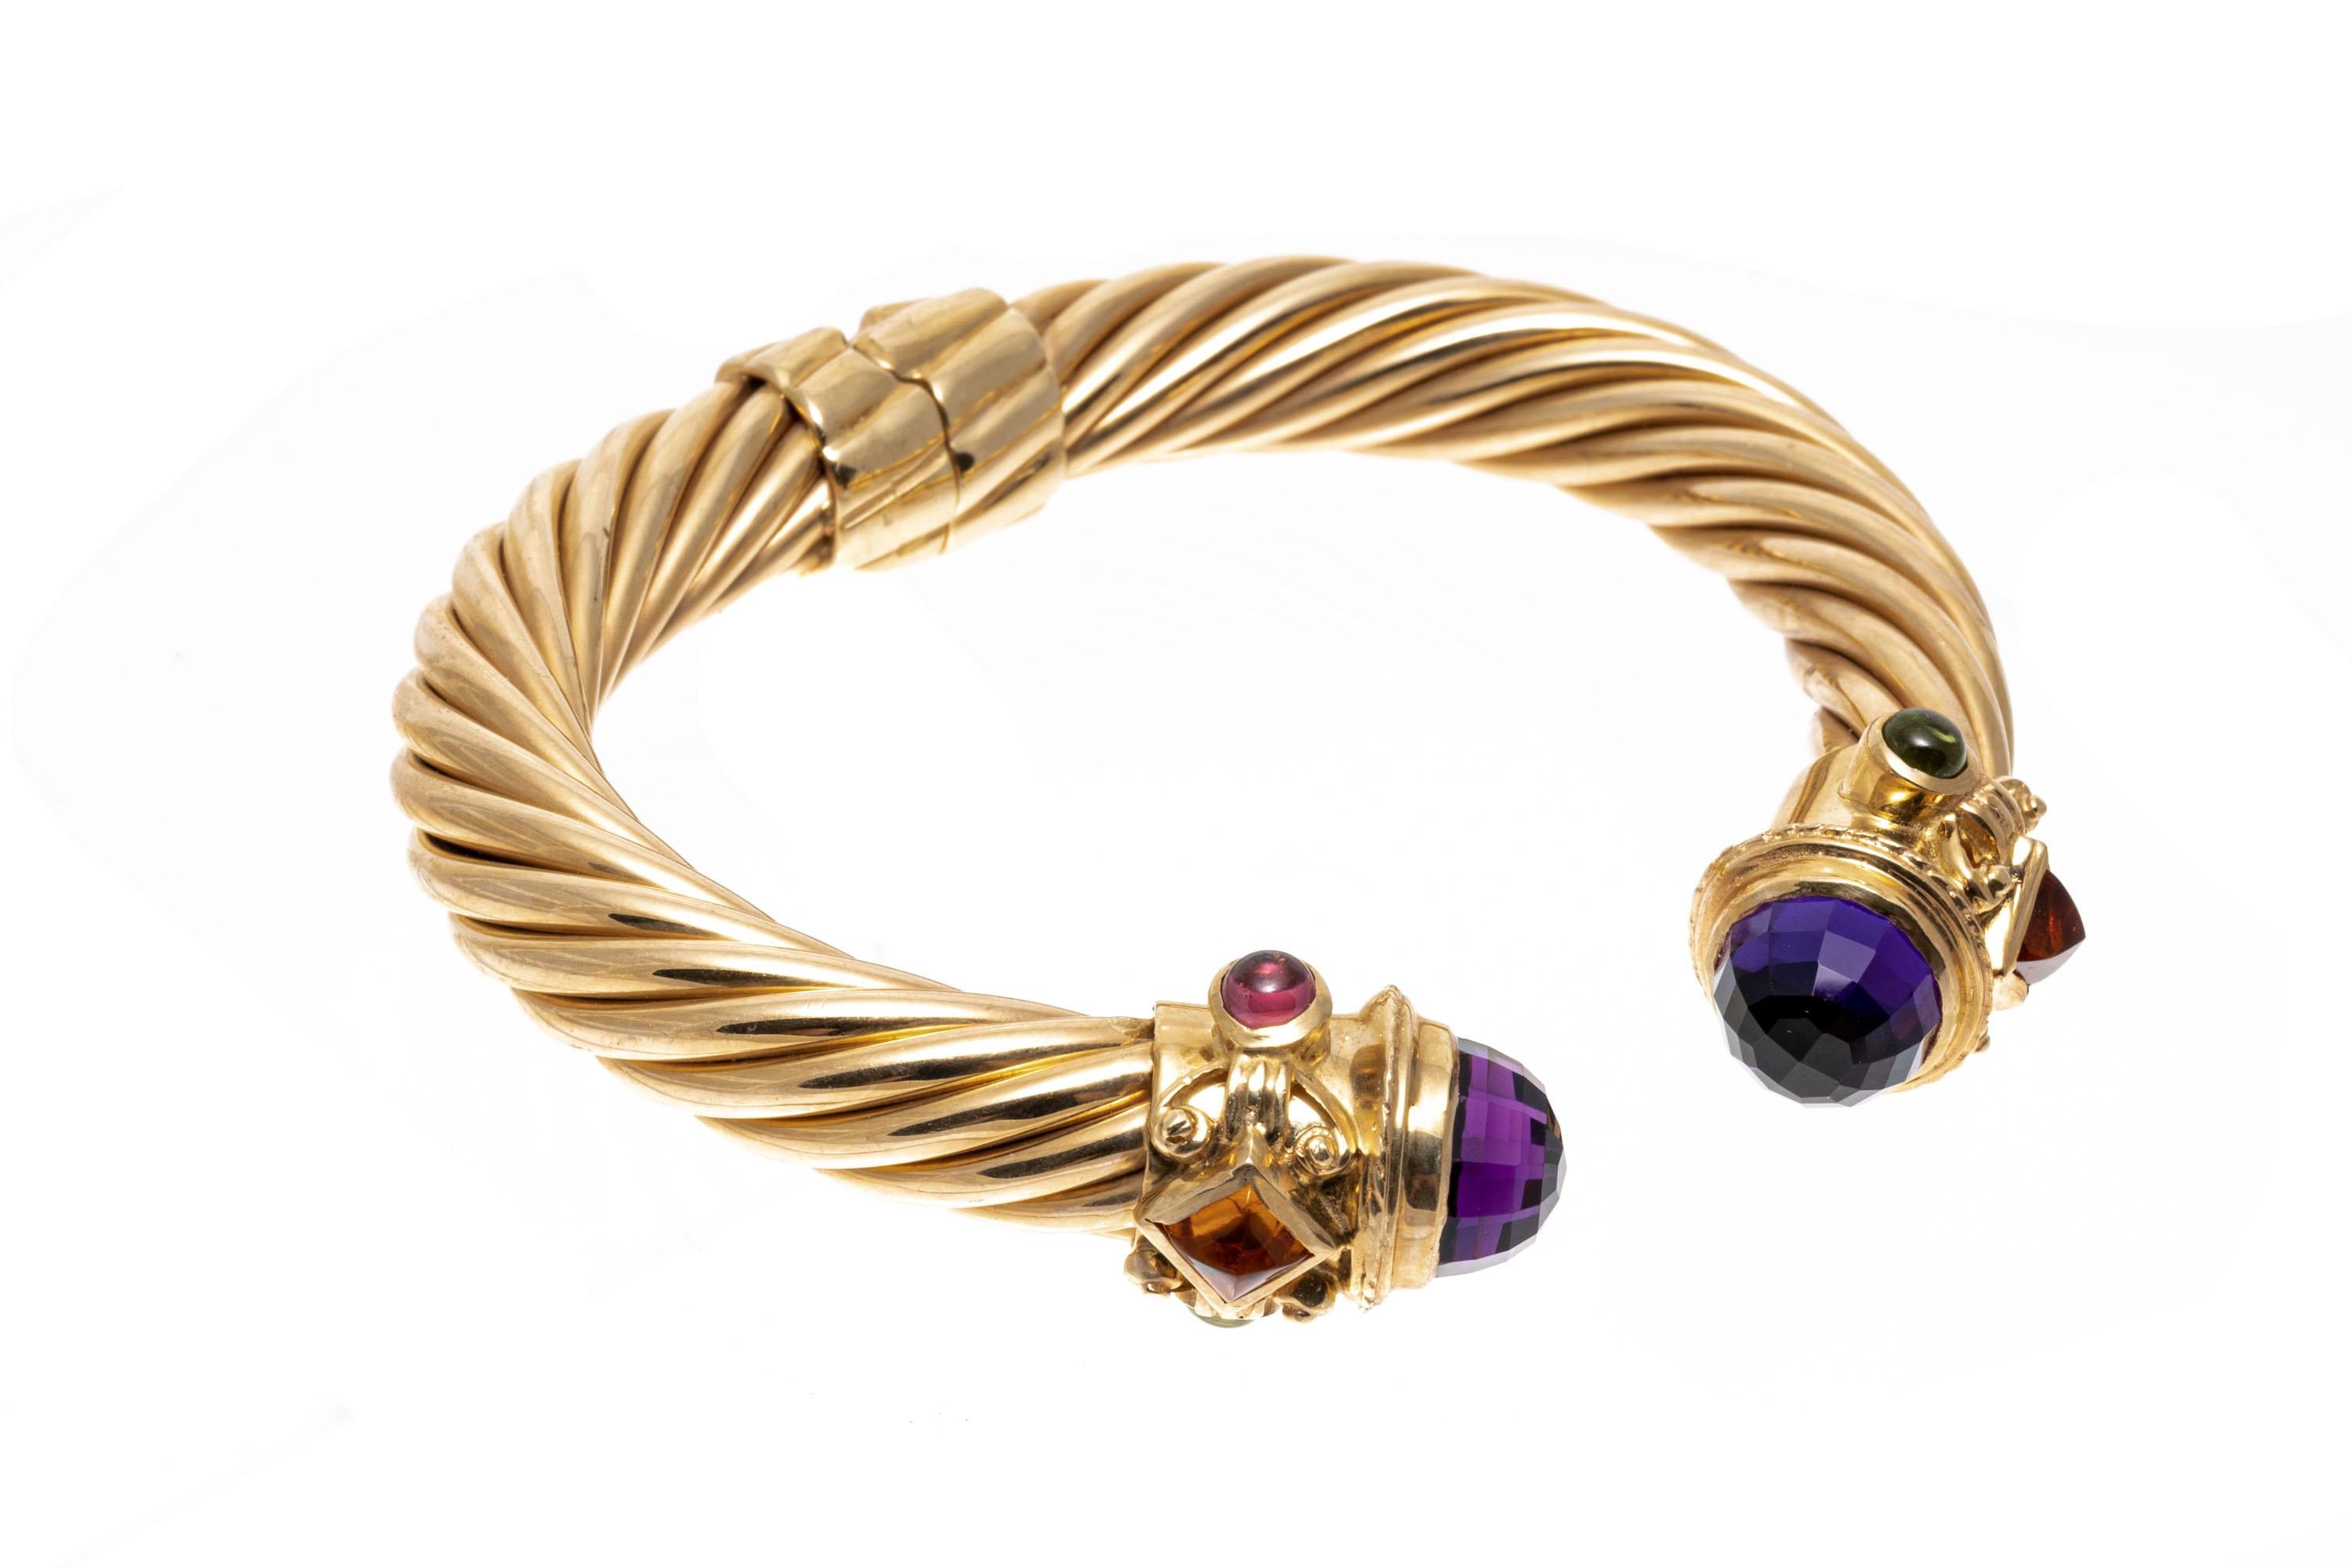 14k Yellow Gold Ribbed Open Cuff Bangle Bracelet Set With Amethyst, Tourmaline And Citrine.
This imposing bracelet is a hinged, ribbed, open cuff style bangle, with baroque style ends set with square cabachon cut yellow citrines, round cabachon pink